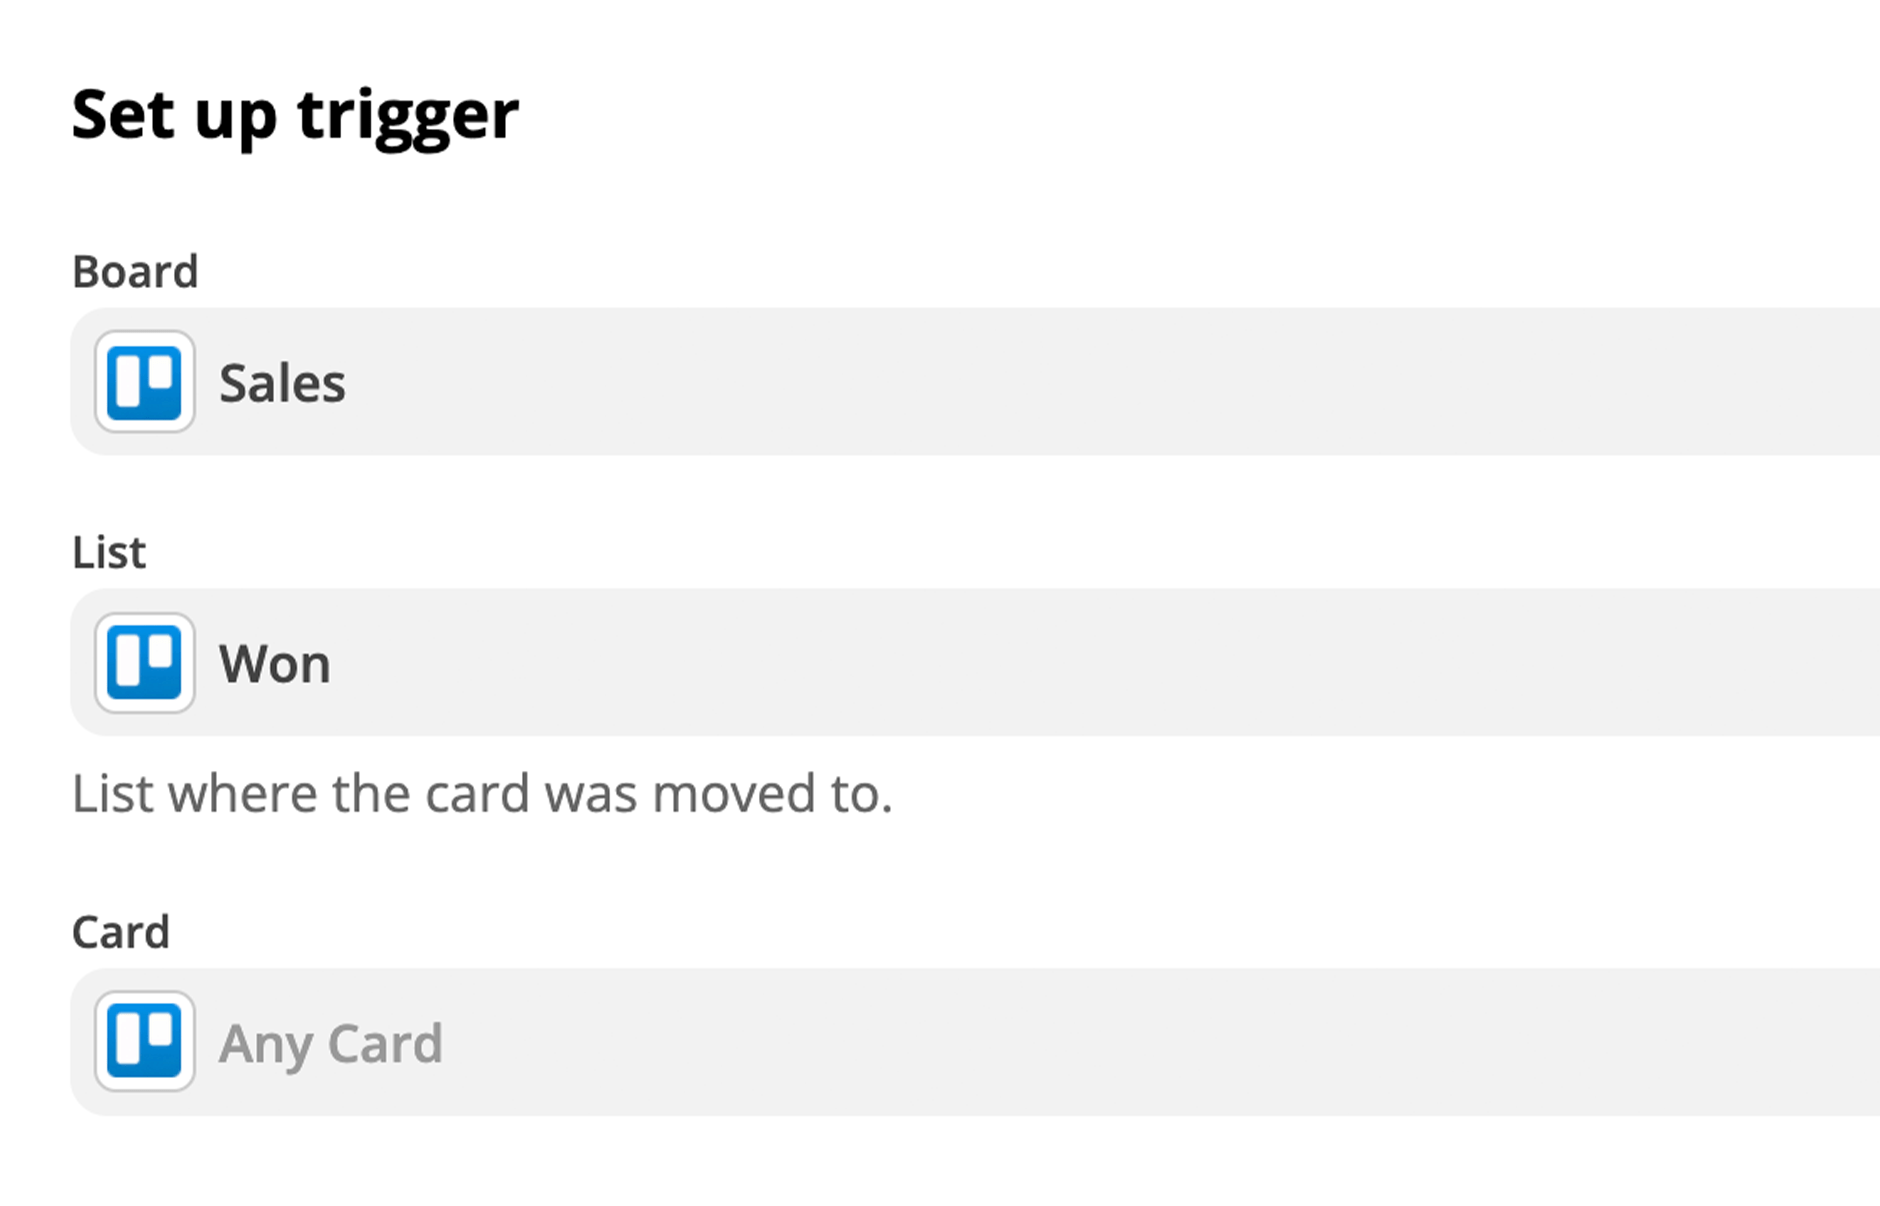 A step is being configured in Zapier to determine which Trello board, list, and card should trigger the Zap.